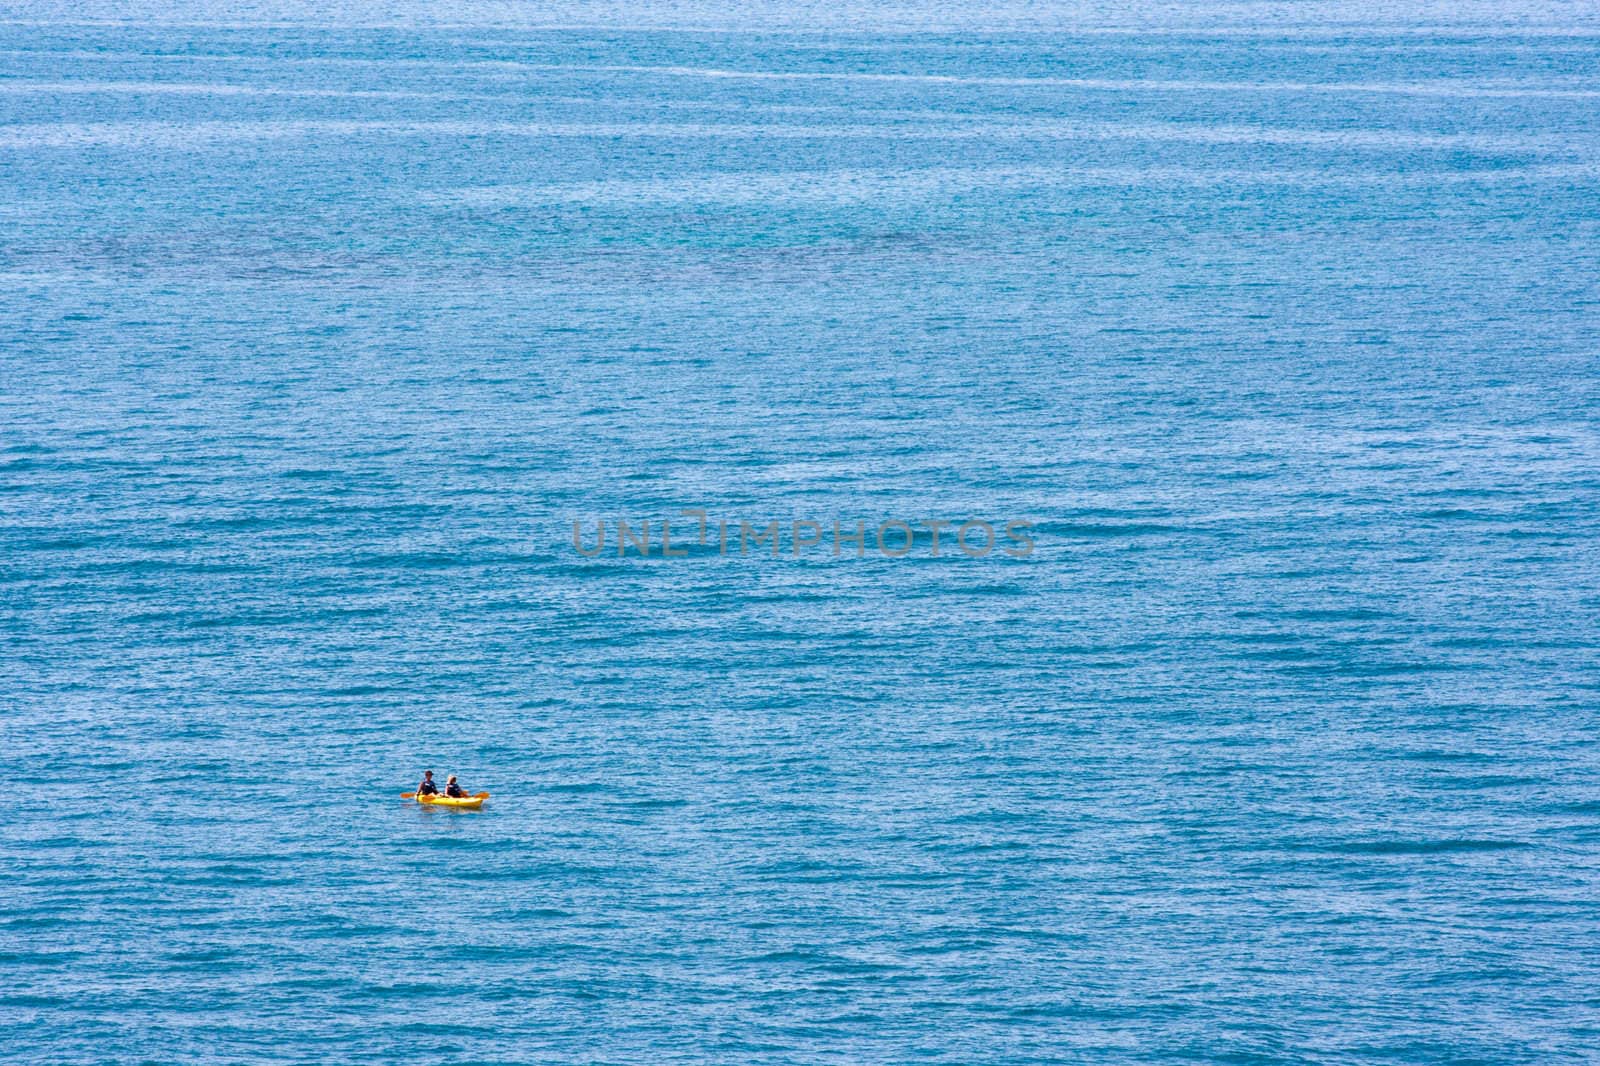 A minimalist photo of a kayak on the open ocean. Photo was taken from the coast of Bermuda.